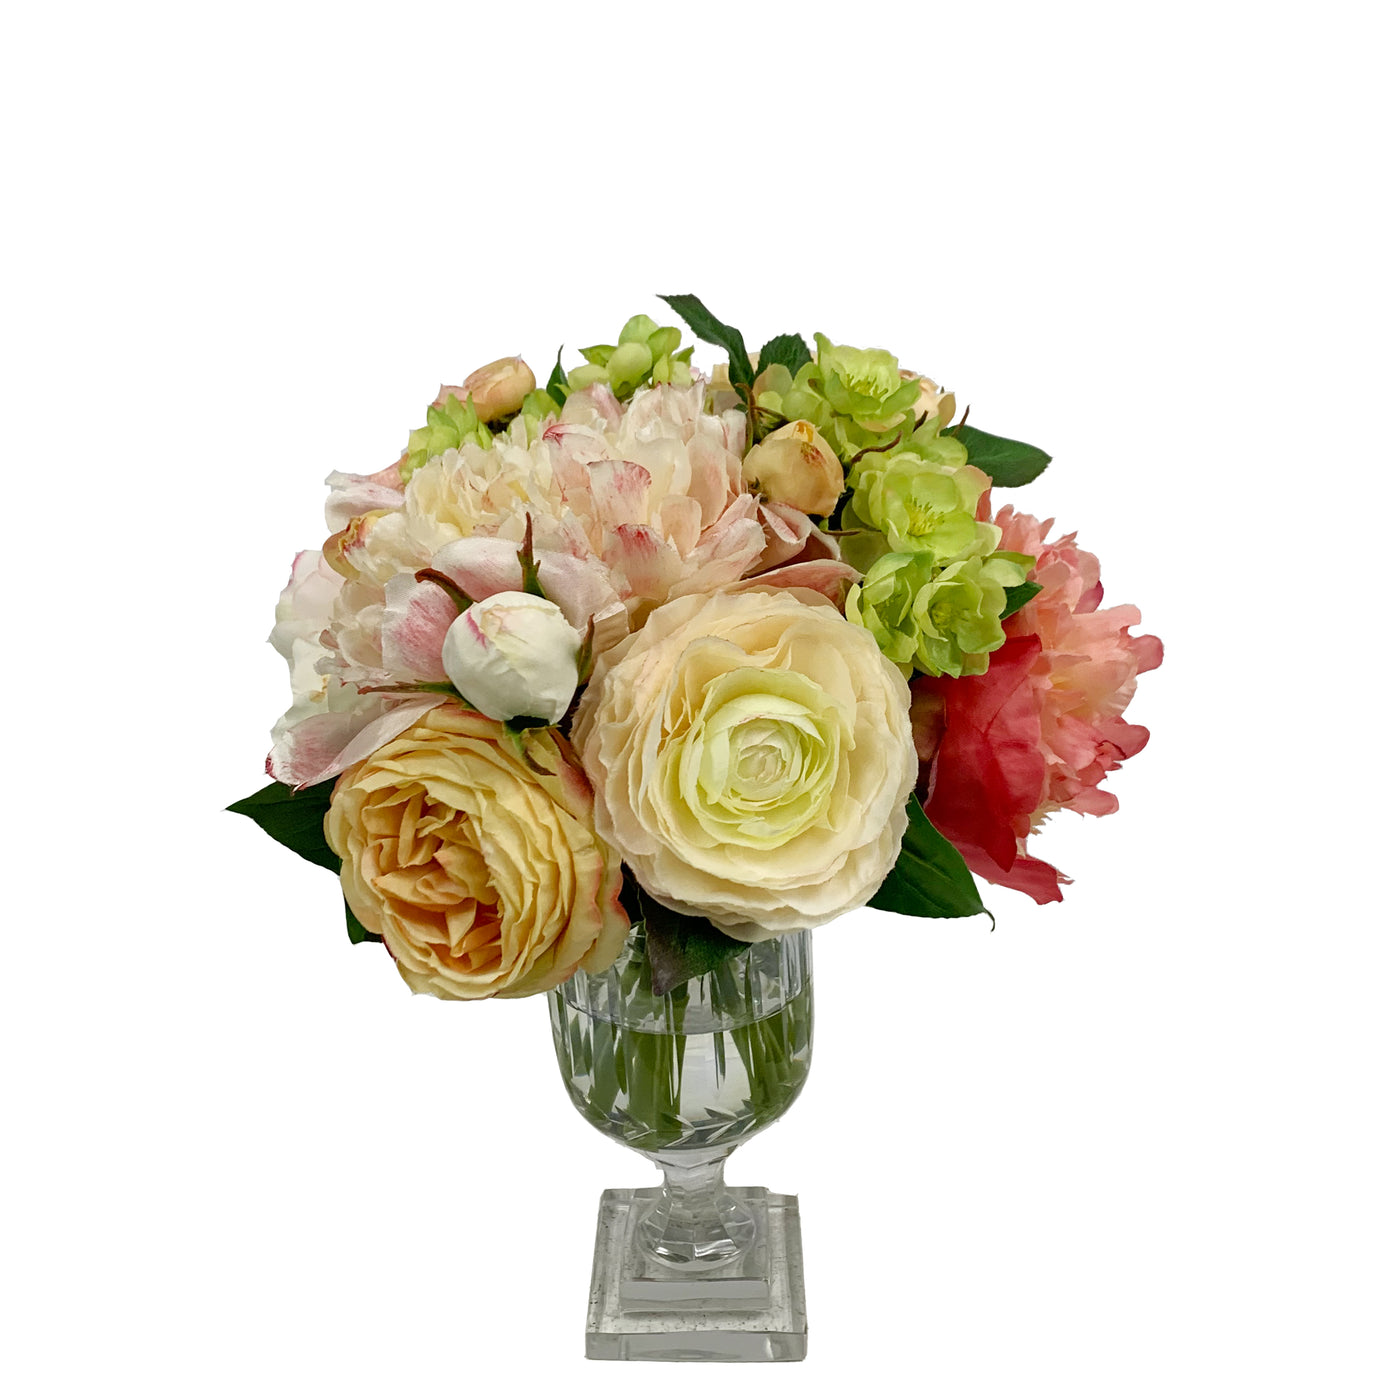 Mixed roses and peonies in clear glass urn